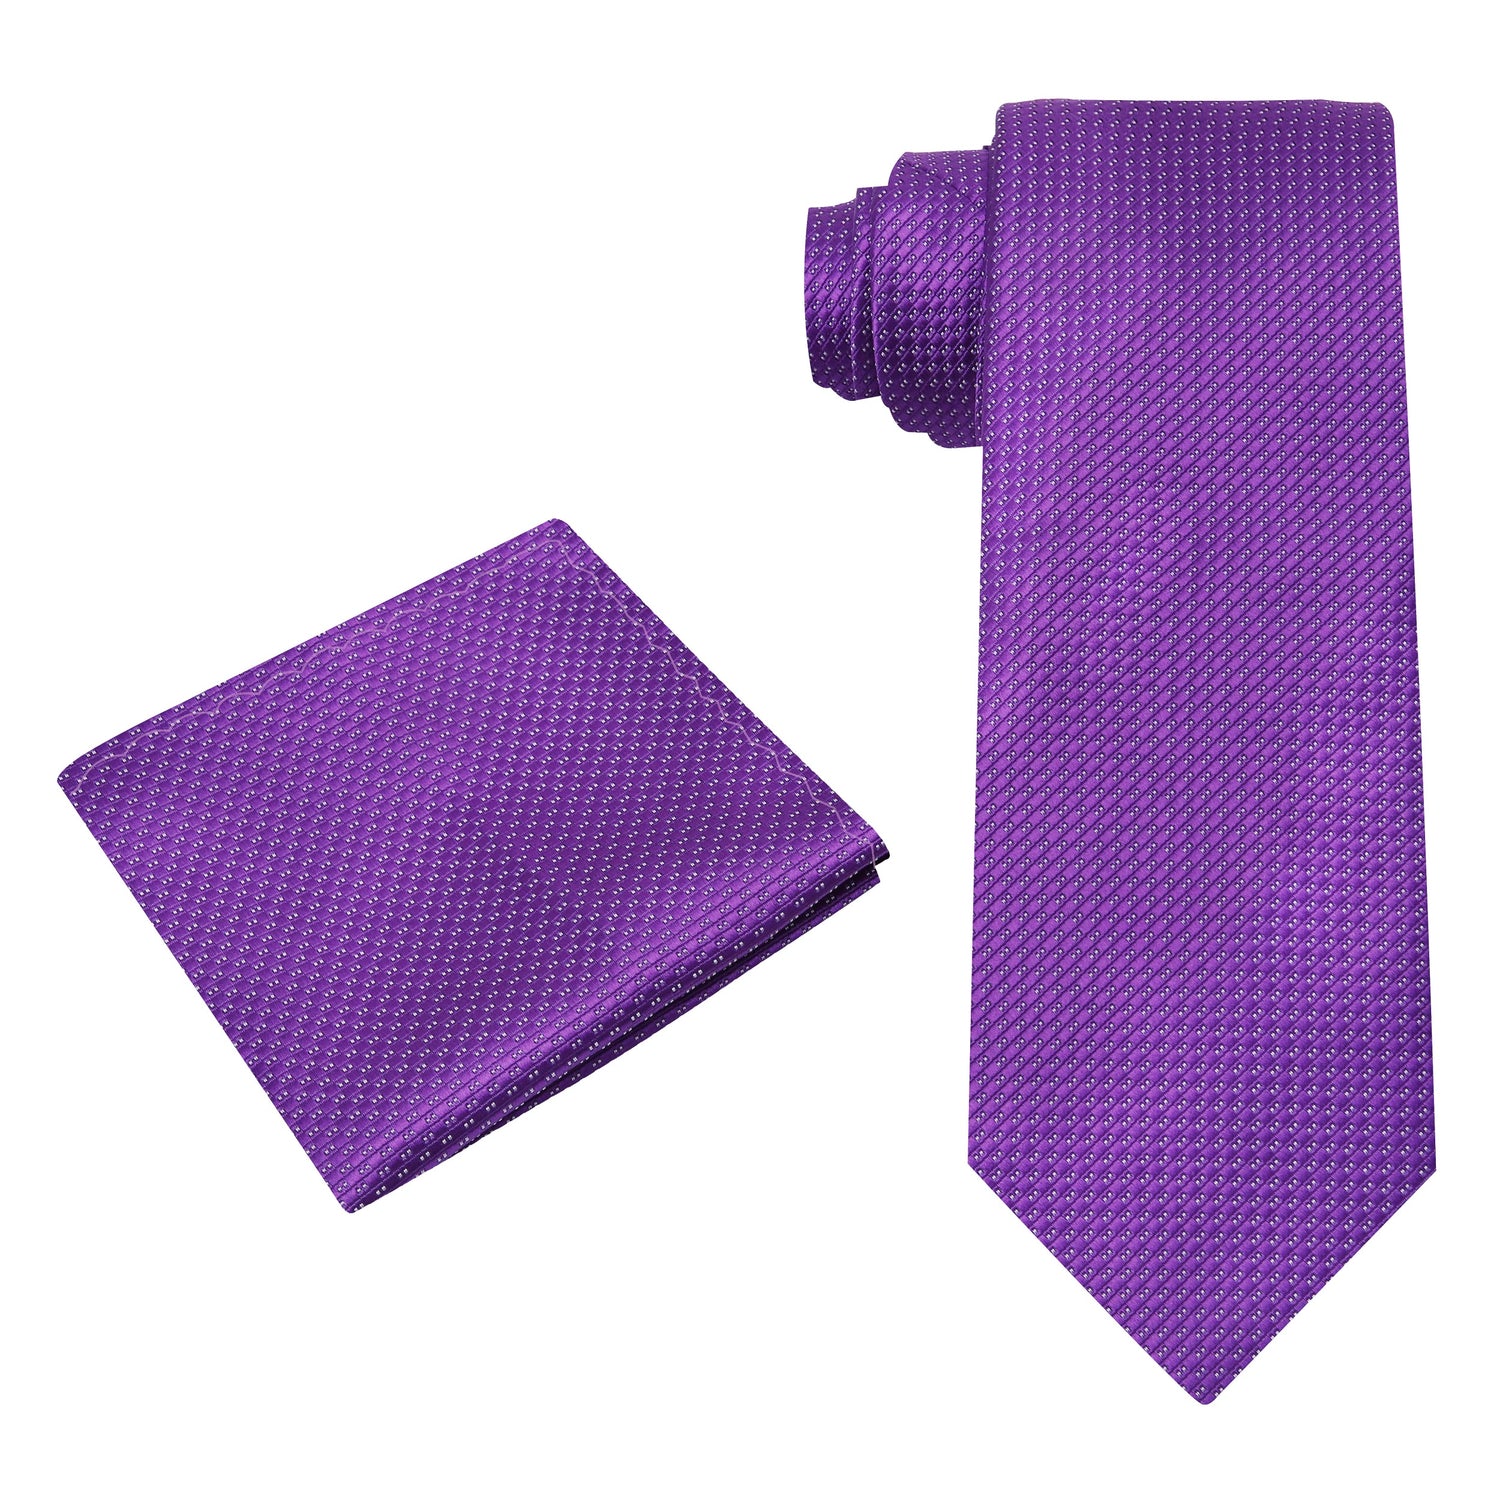 Alt View: Purple with White Dots Tie and Pocket Square